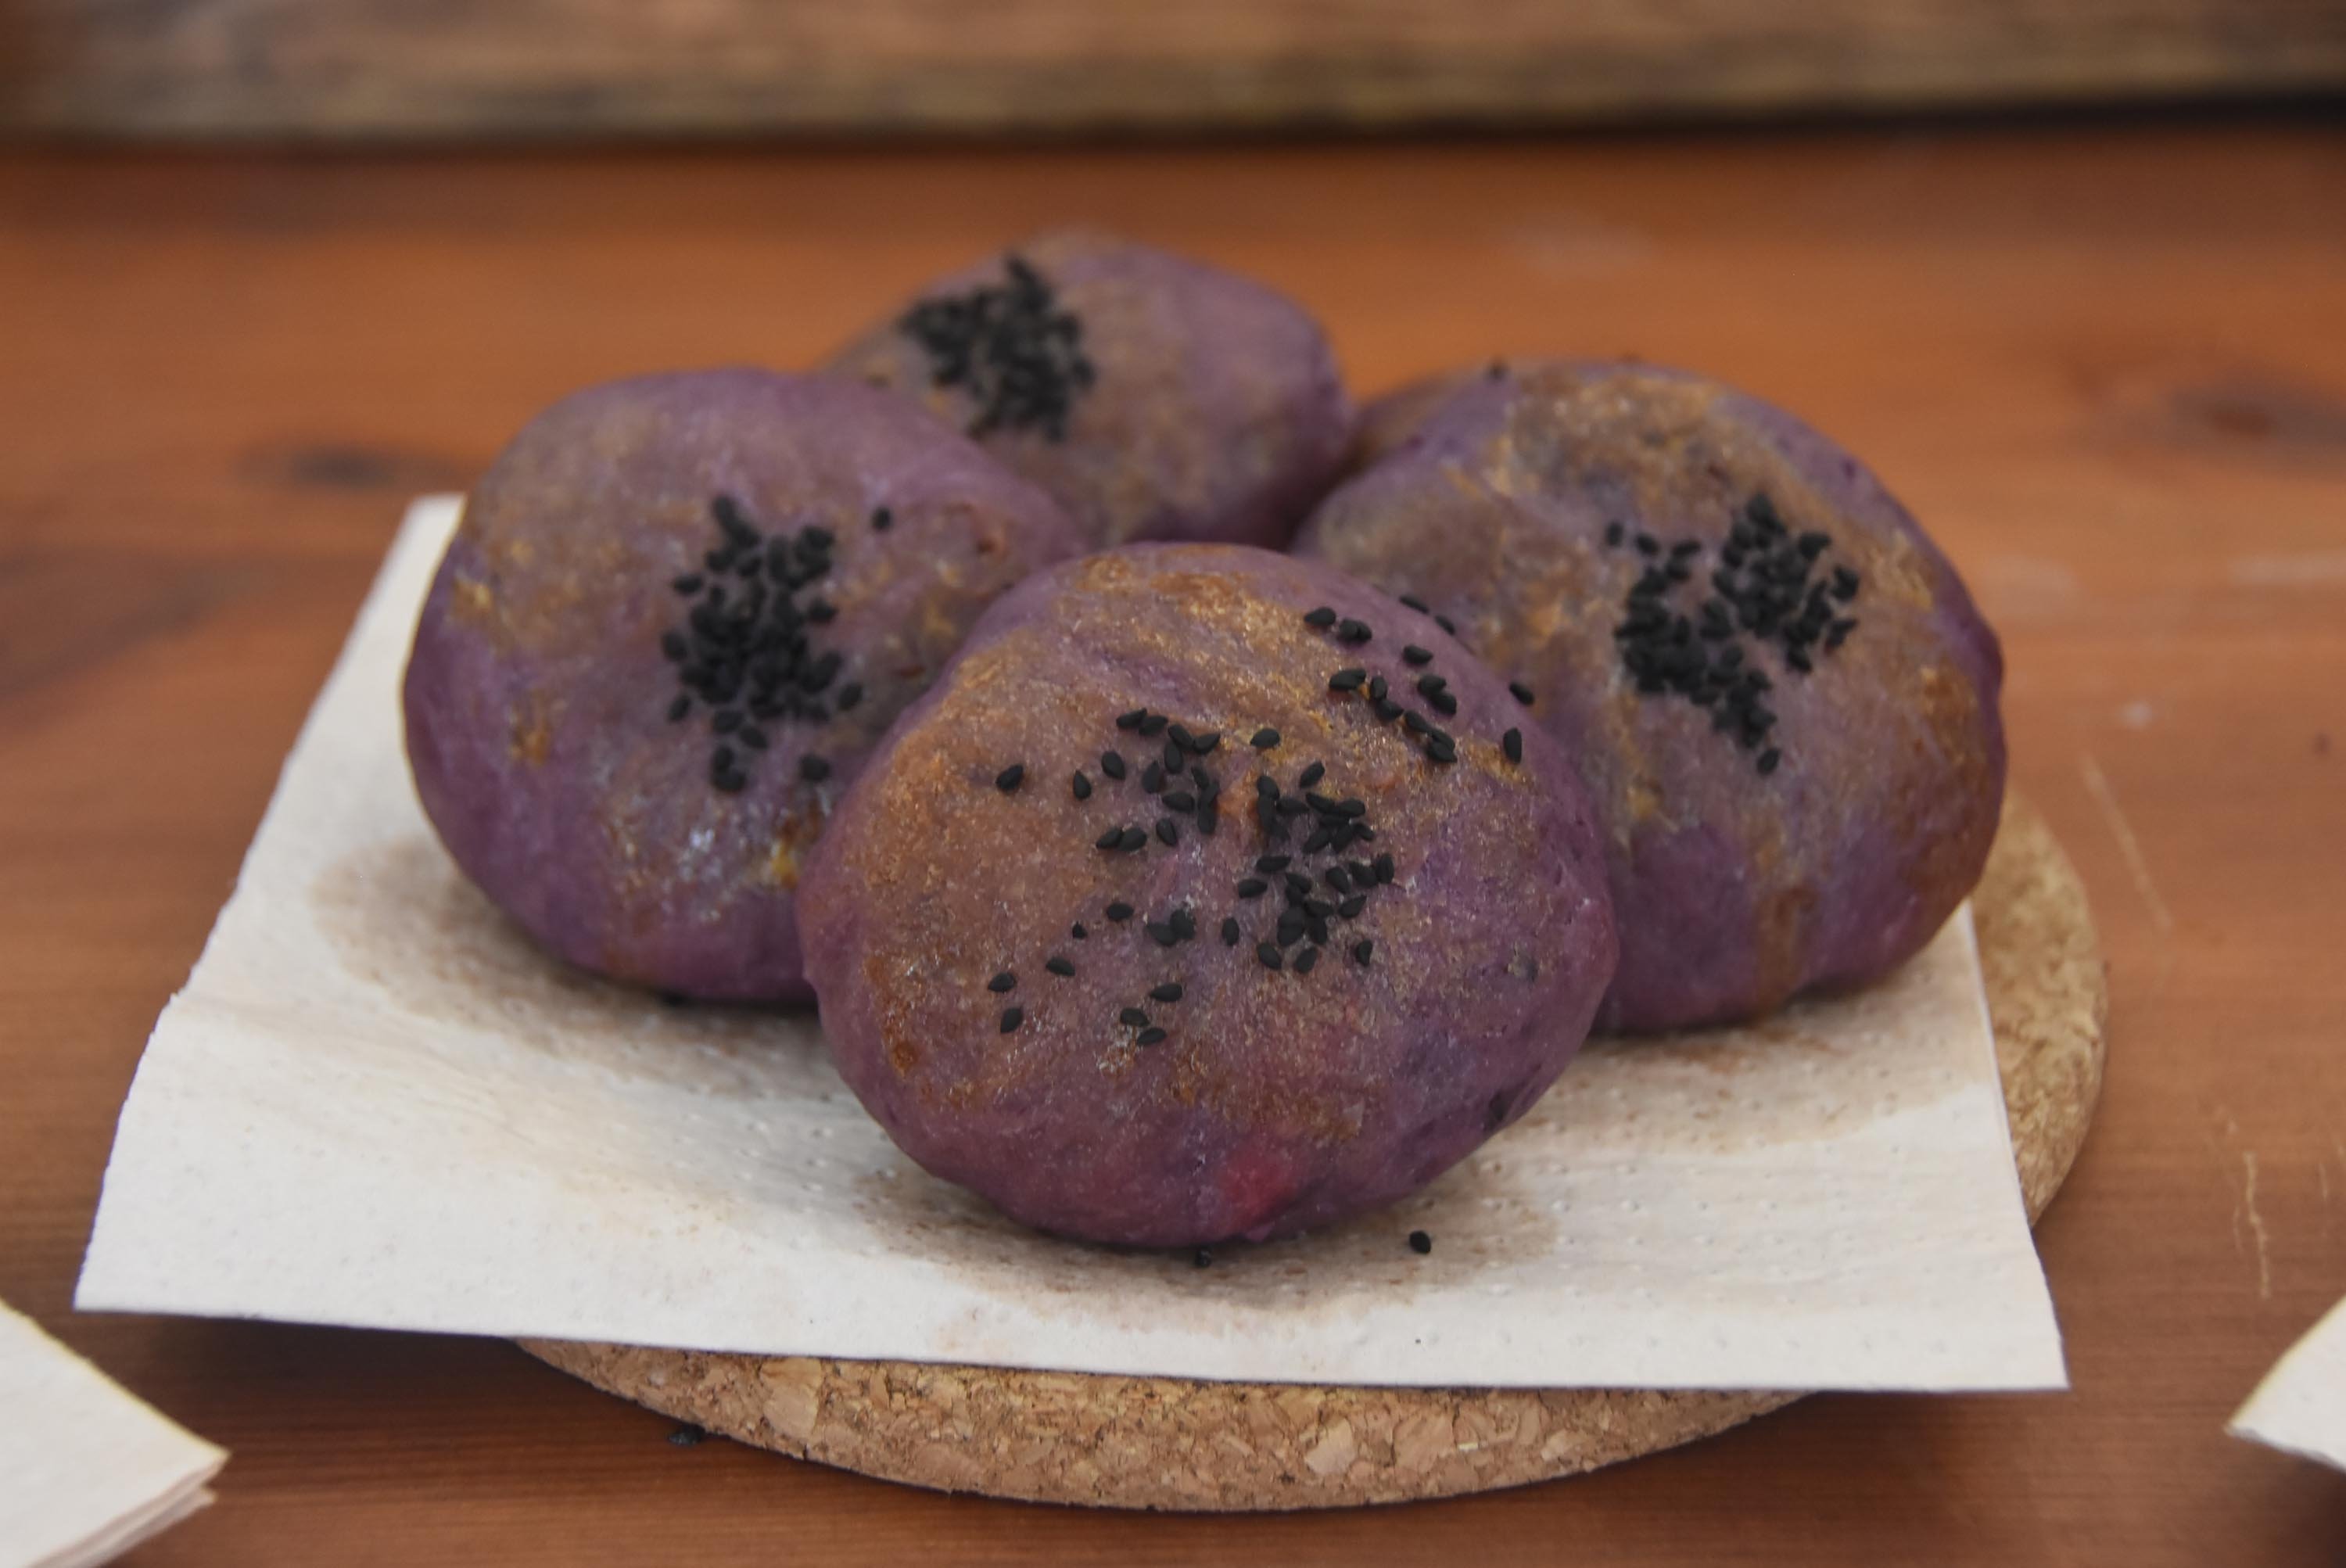 The purple bread craze has caught on nationwide, with many bakeries now producing purple baked goods in all shapes and sizes. (DHA Photo)